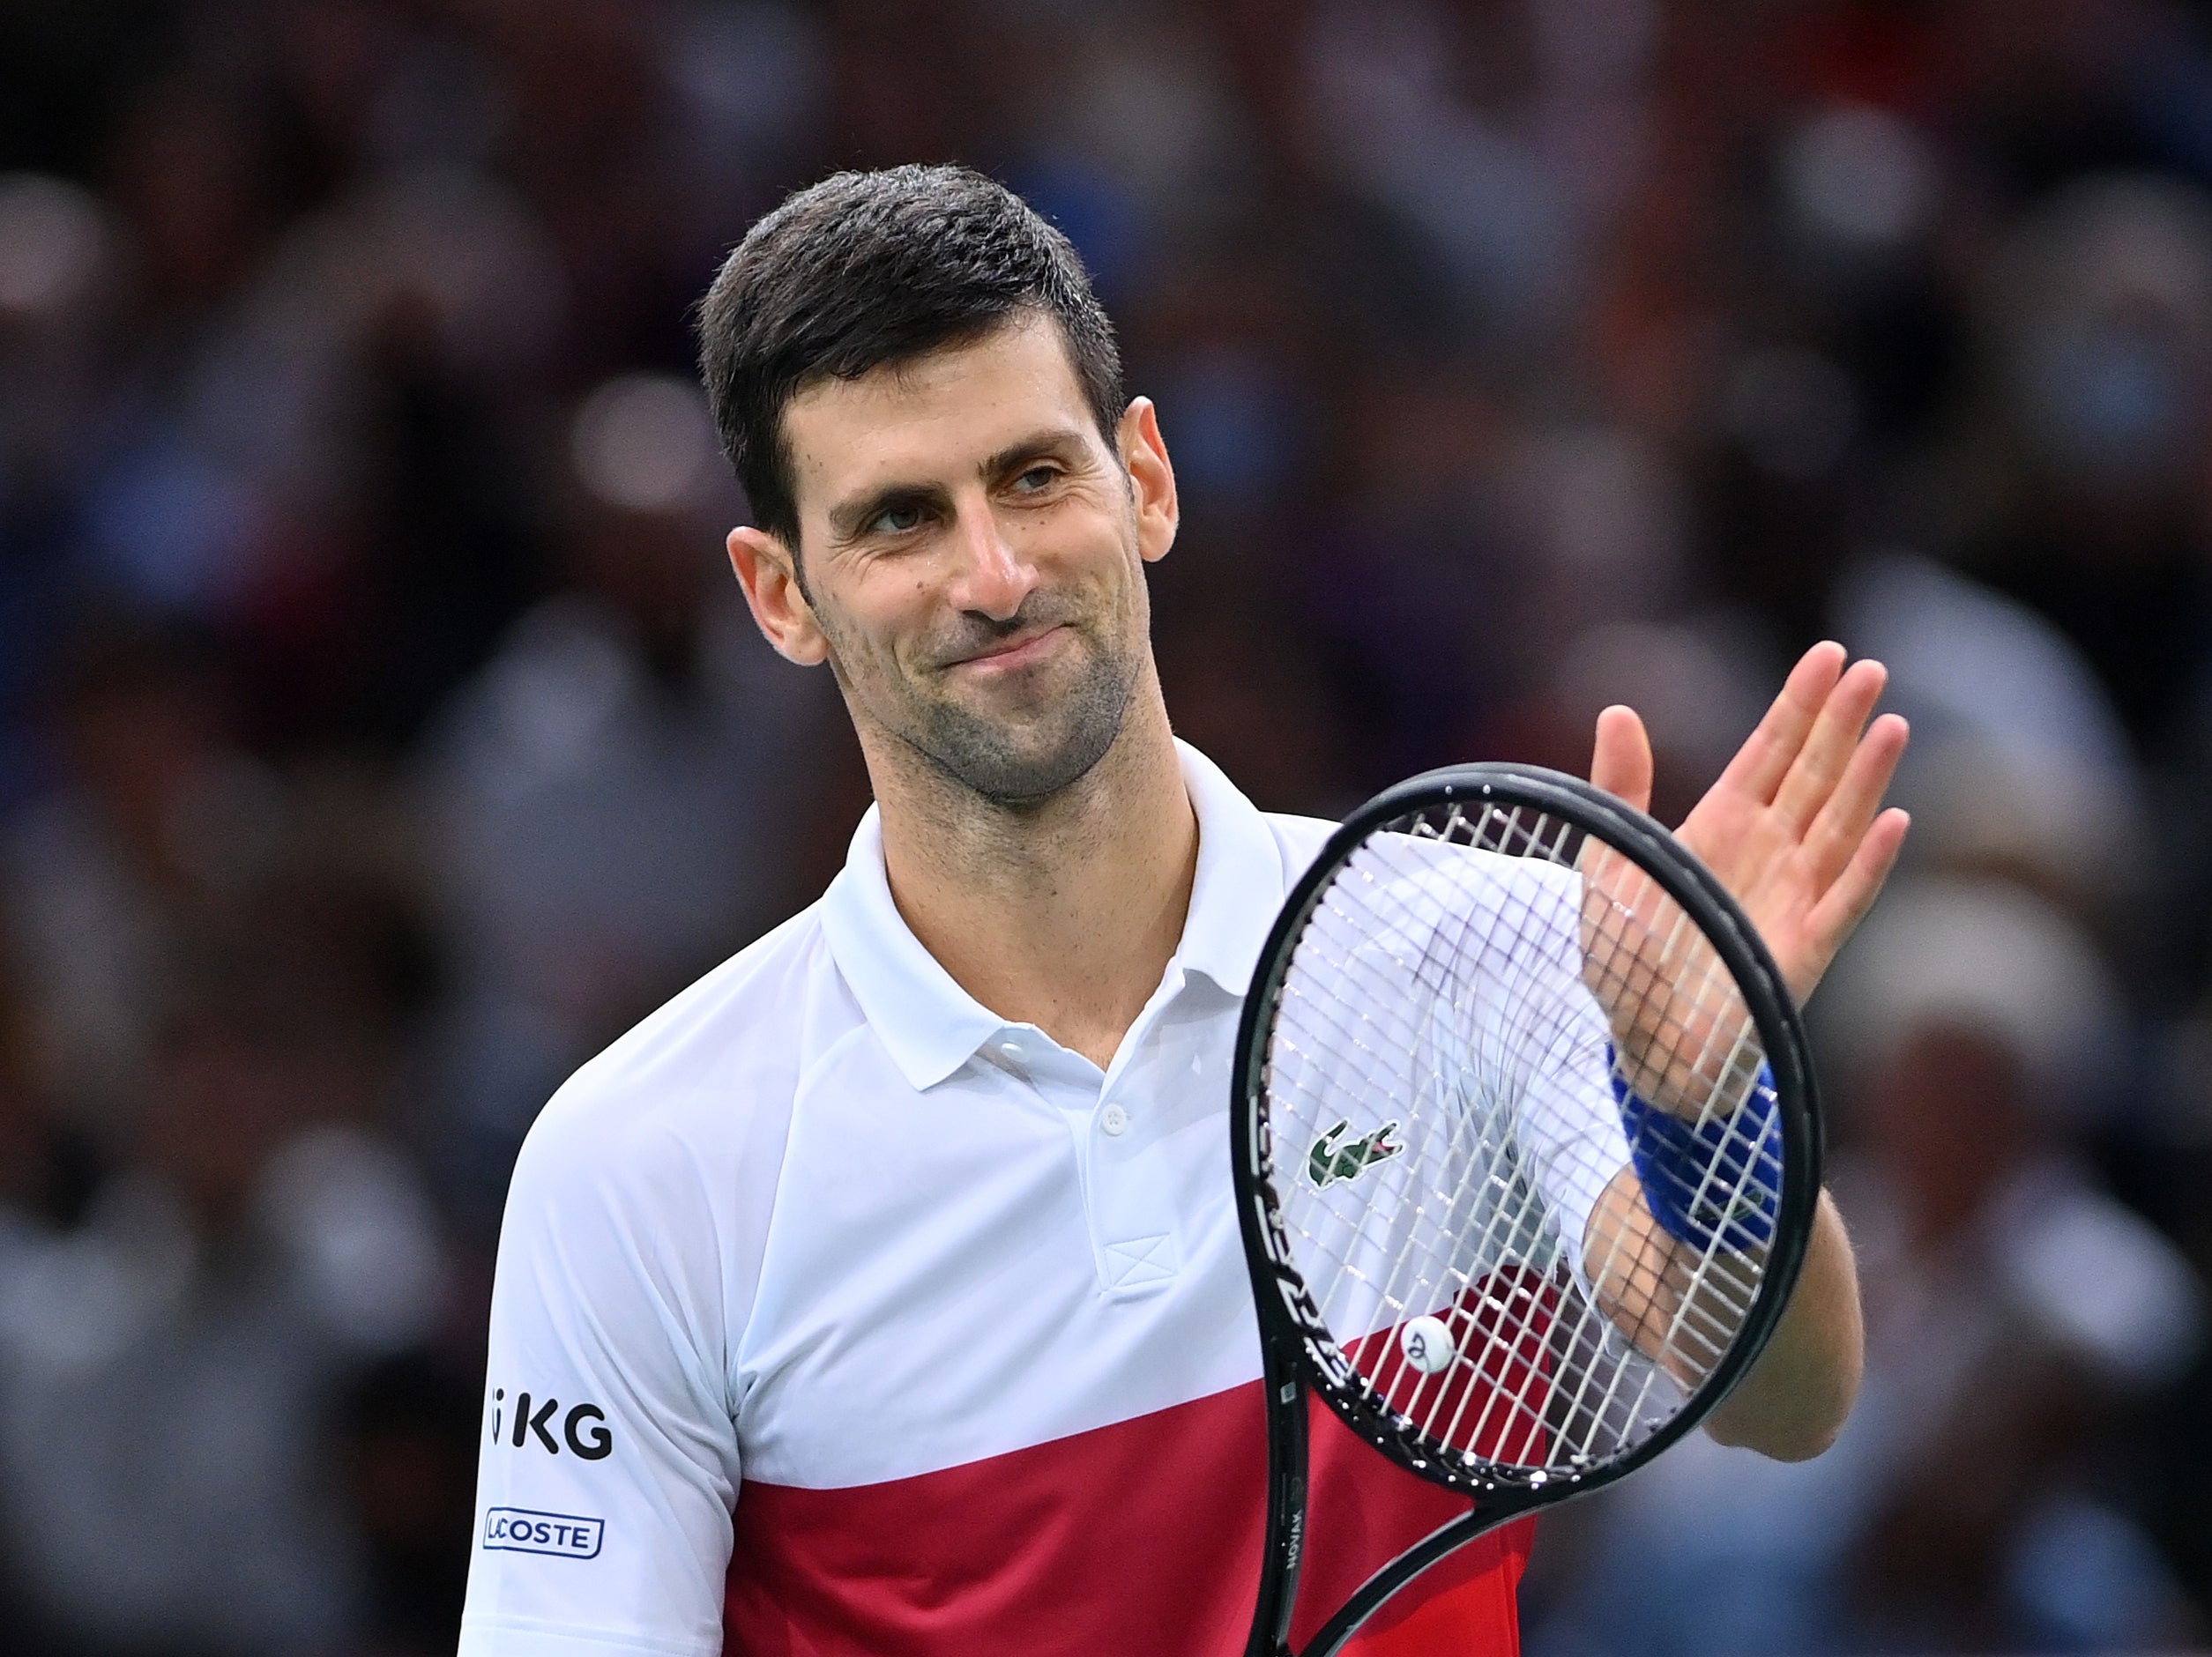 Being deprived of what he loves most for almost a week could light a fire inside Djokovic in the race to establish a grand slam record